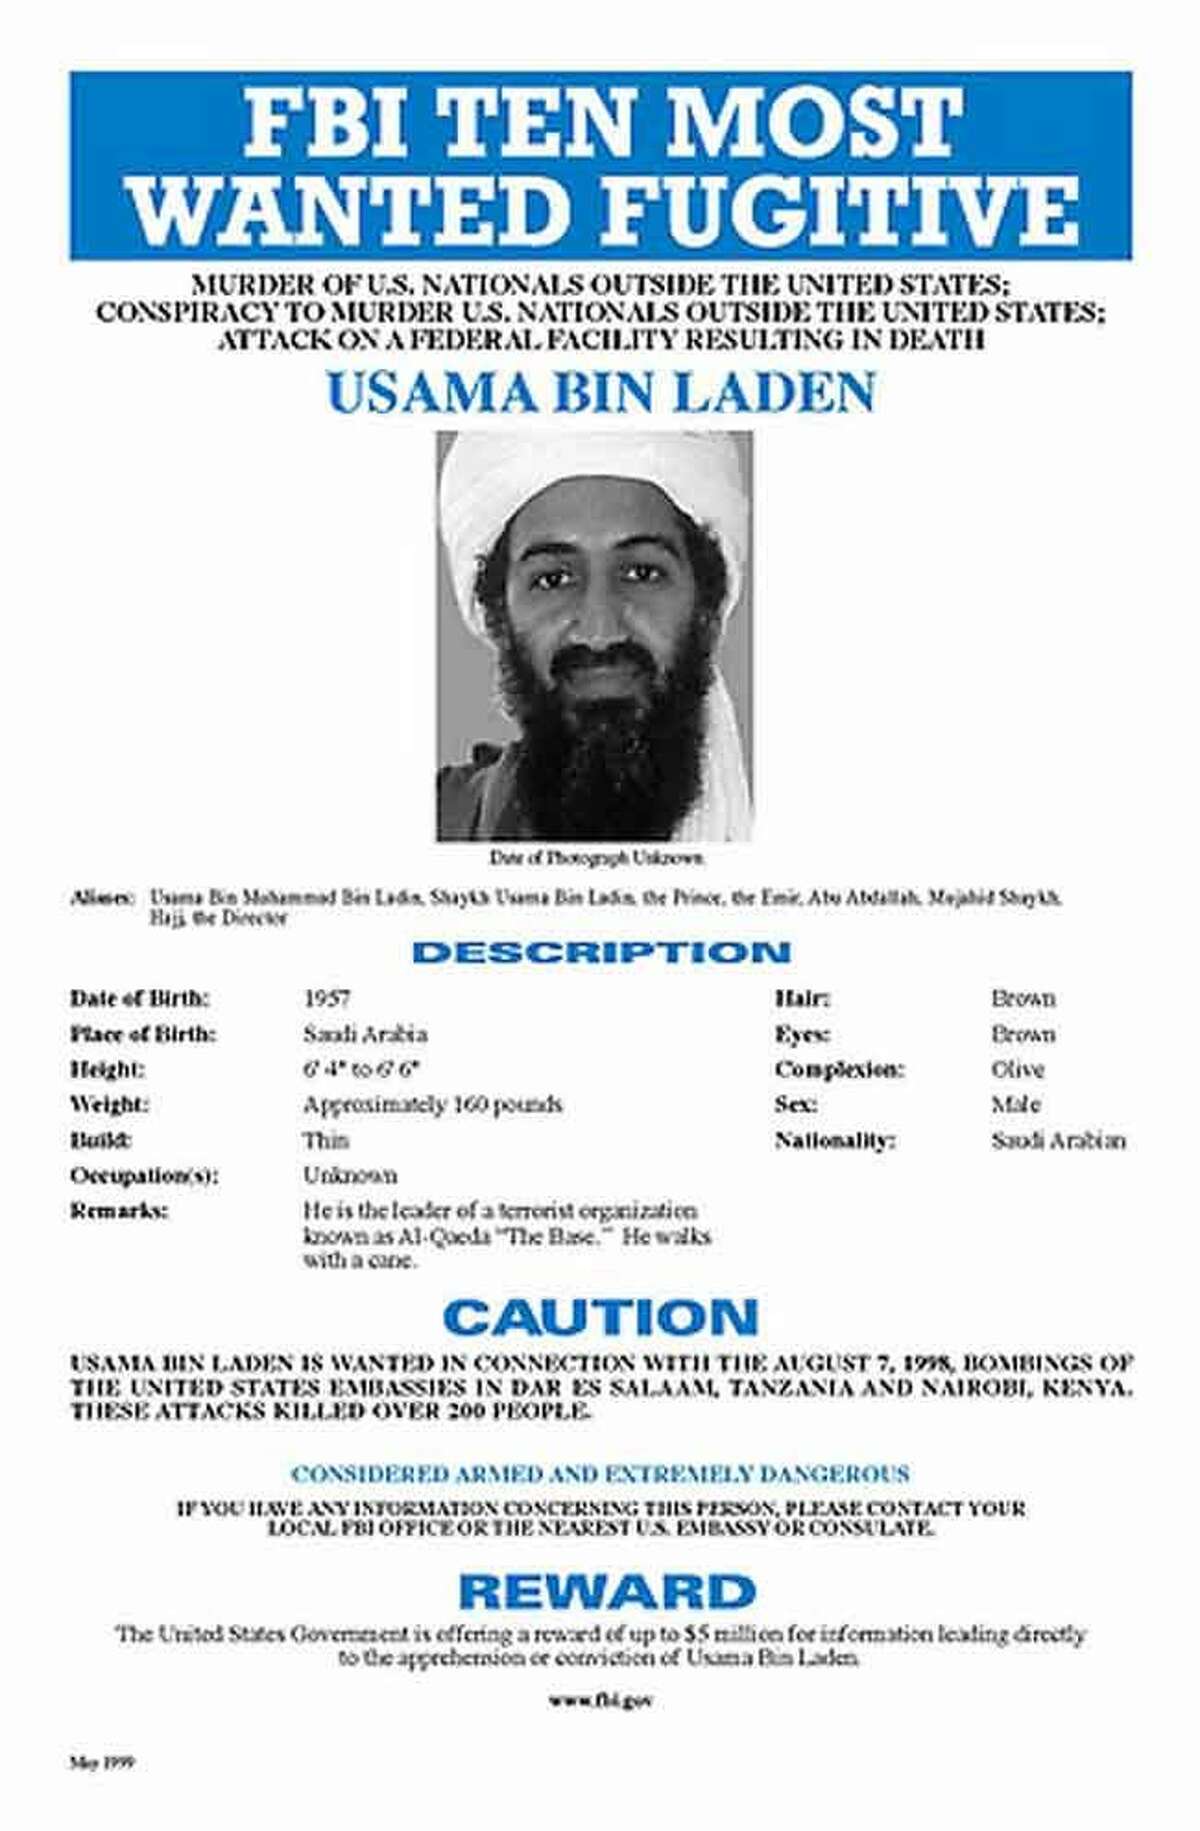 FILE - In this file image, Osama Bin Laden, the al Qaida leader, appears on this layout for an FBI poster after he was placed on the FBI's Ten Most Wanted list in June 1999, in connection with the bombings of the U.S. Embassies in Tanzania and Kenya. A person familiar with developments said Sunday, May 1, 2011 that bin Laden is dead and the U.S. has the body. (AP Photo/FBI, File)